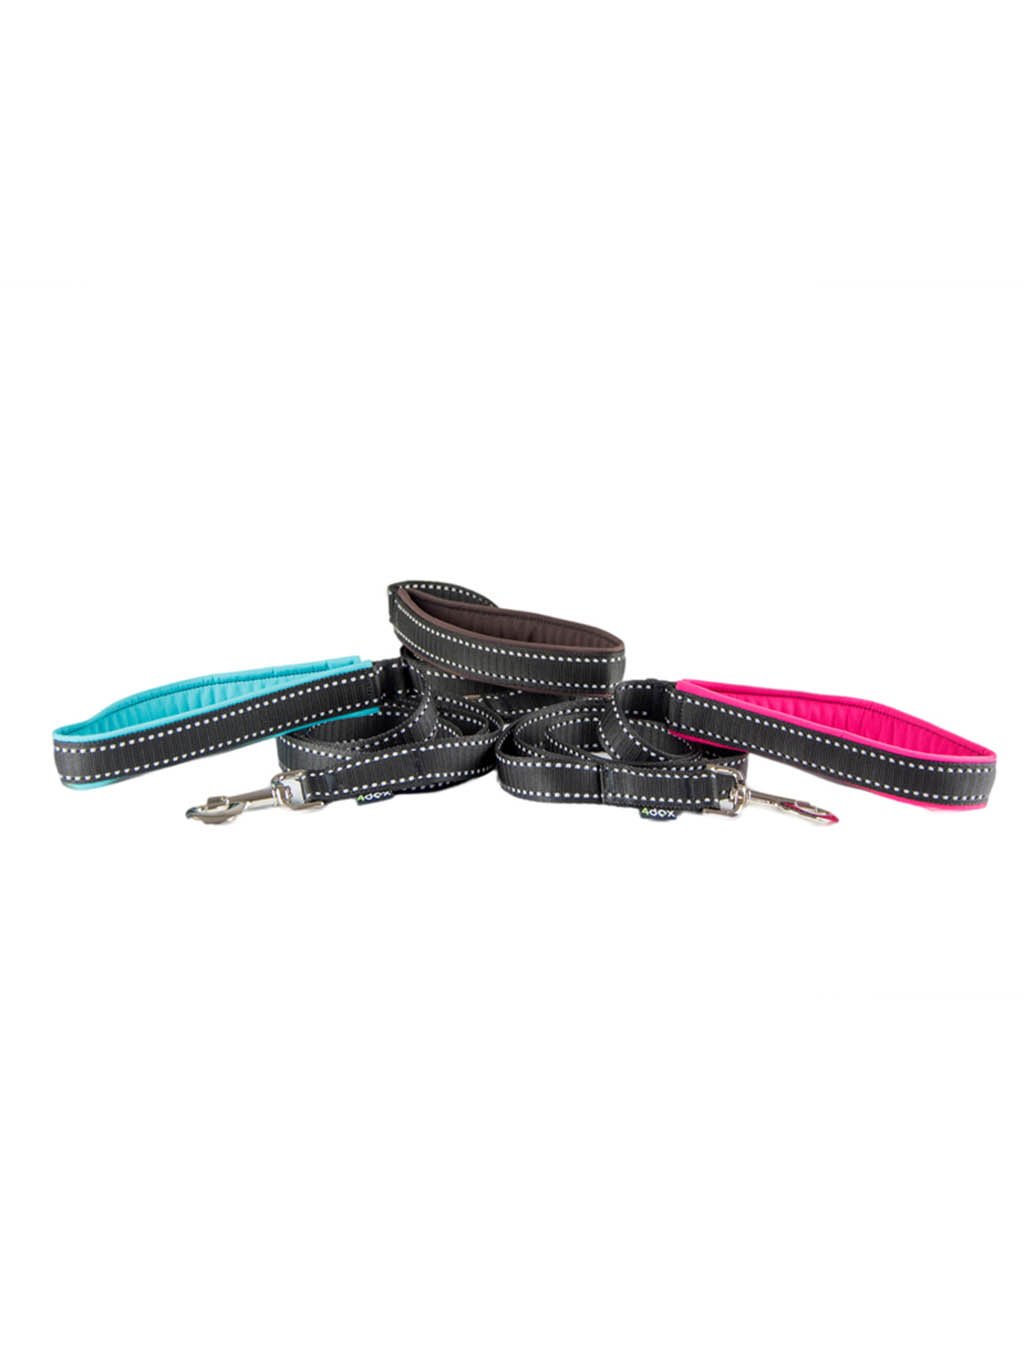 Leash with a reflective tape, PINK